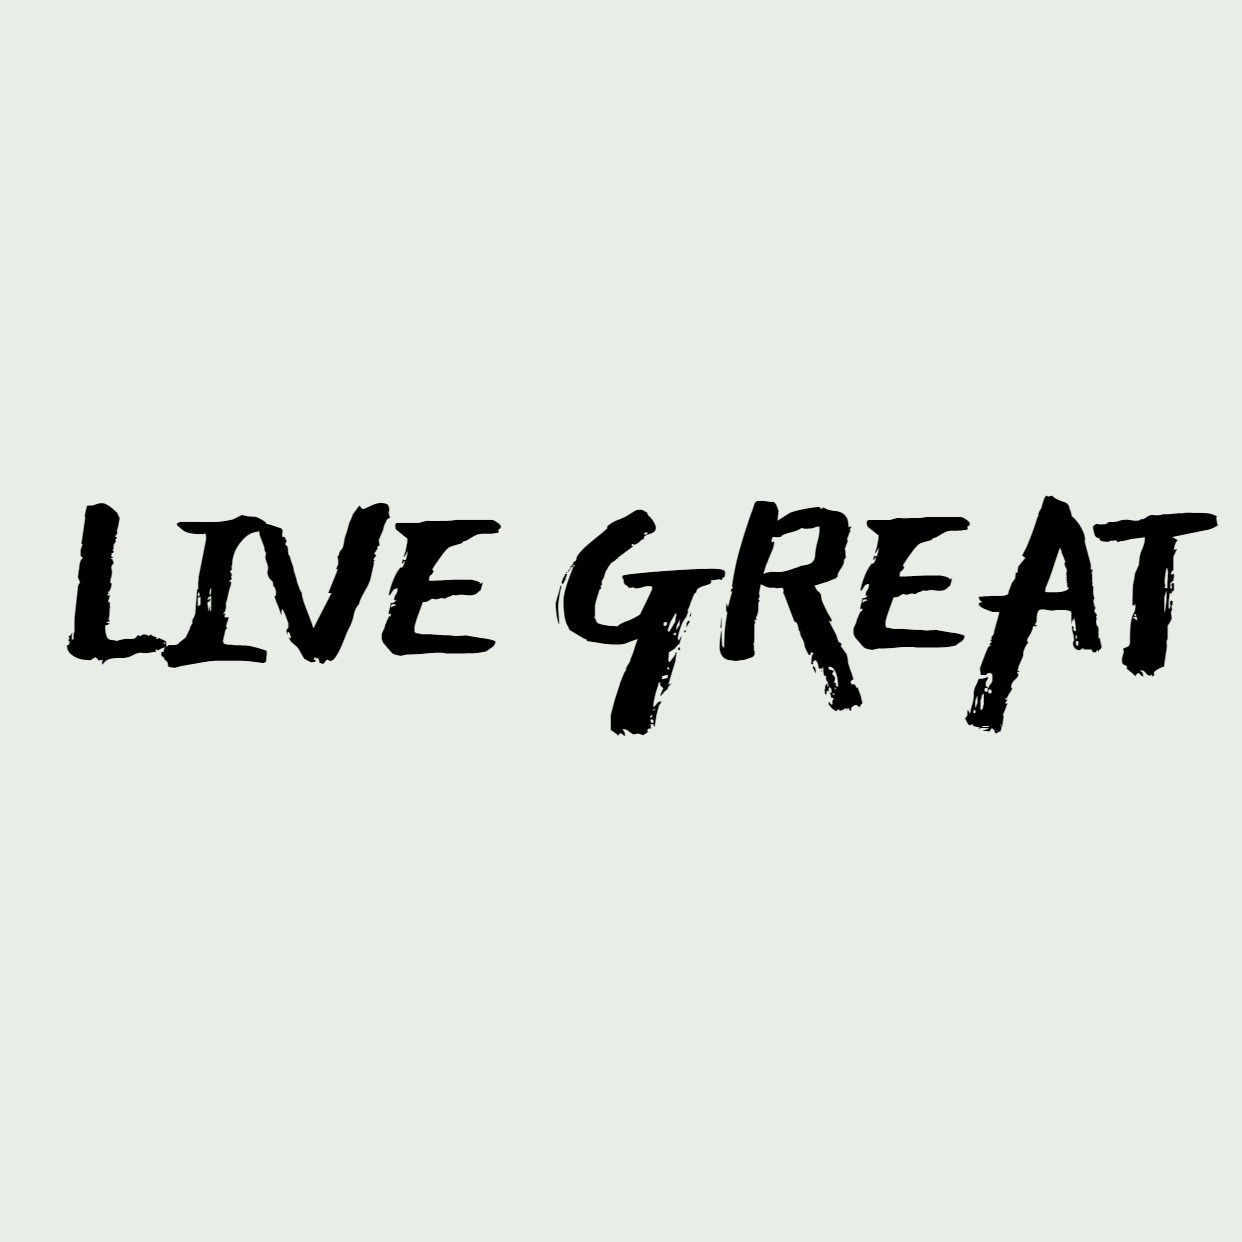 LIVE GREAT